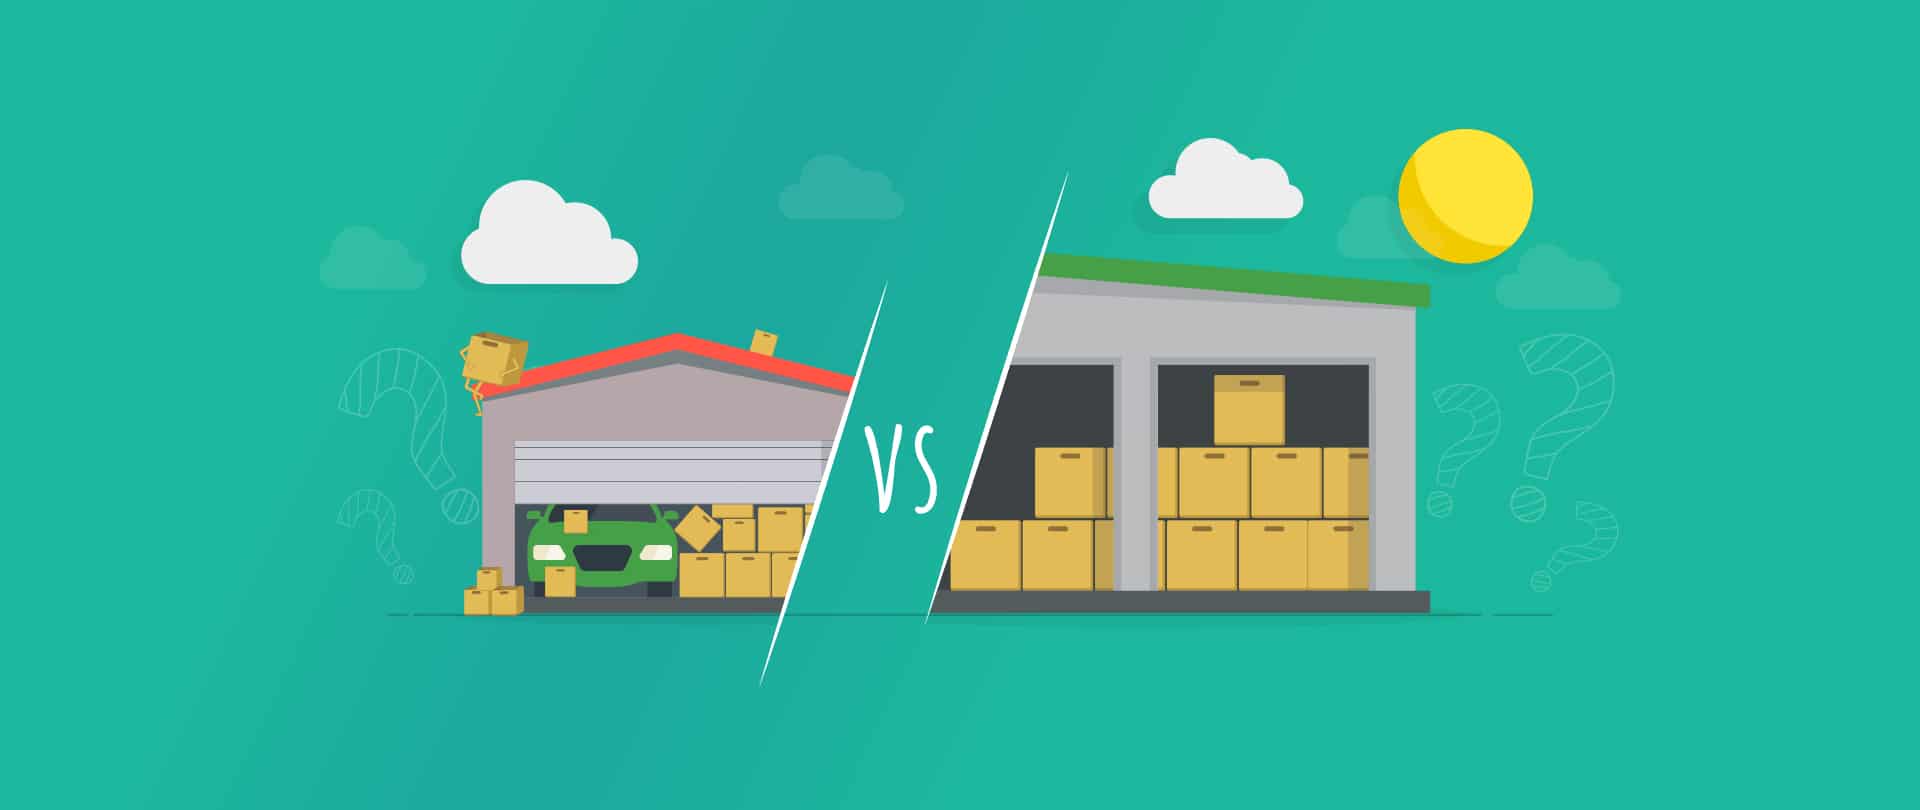 A garage and a warehouse show the difference between in-house vs. outsourcing fulfillment.